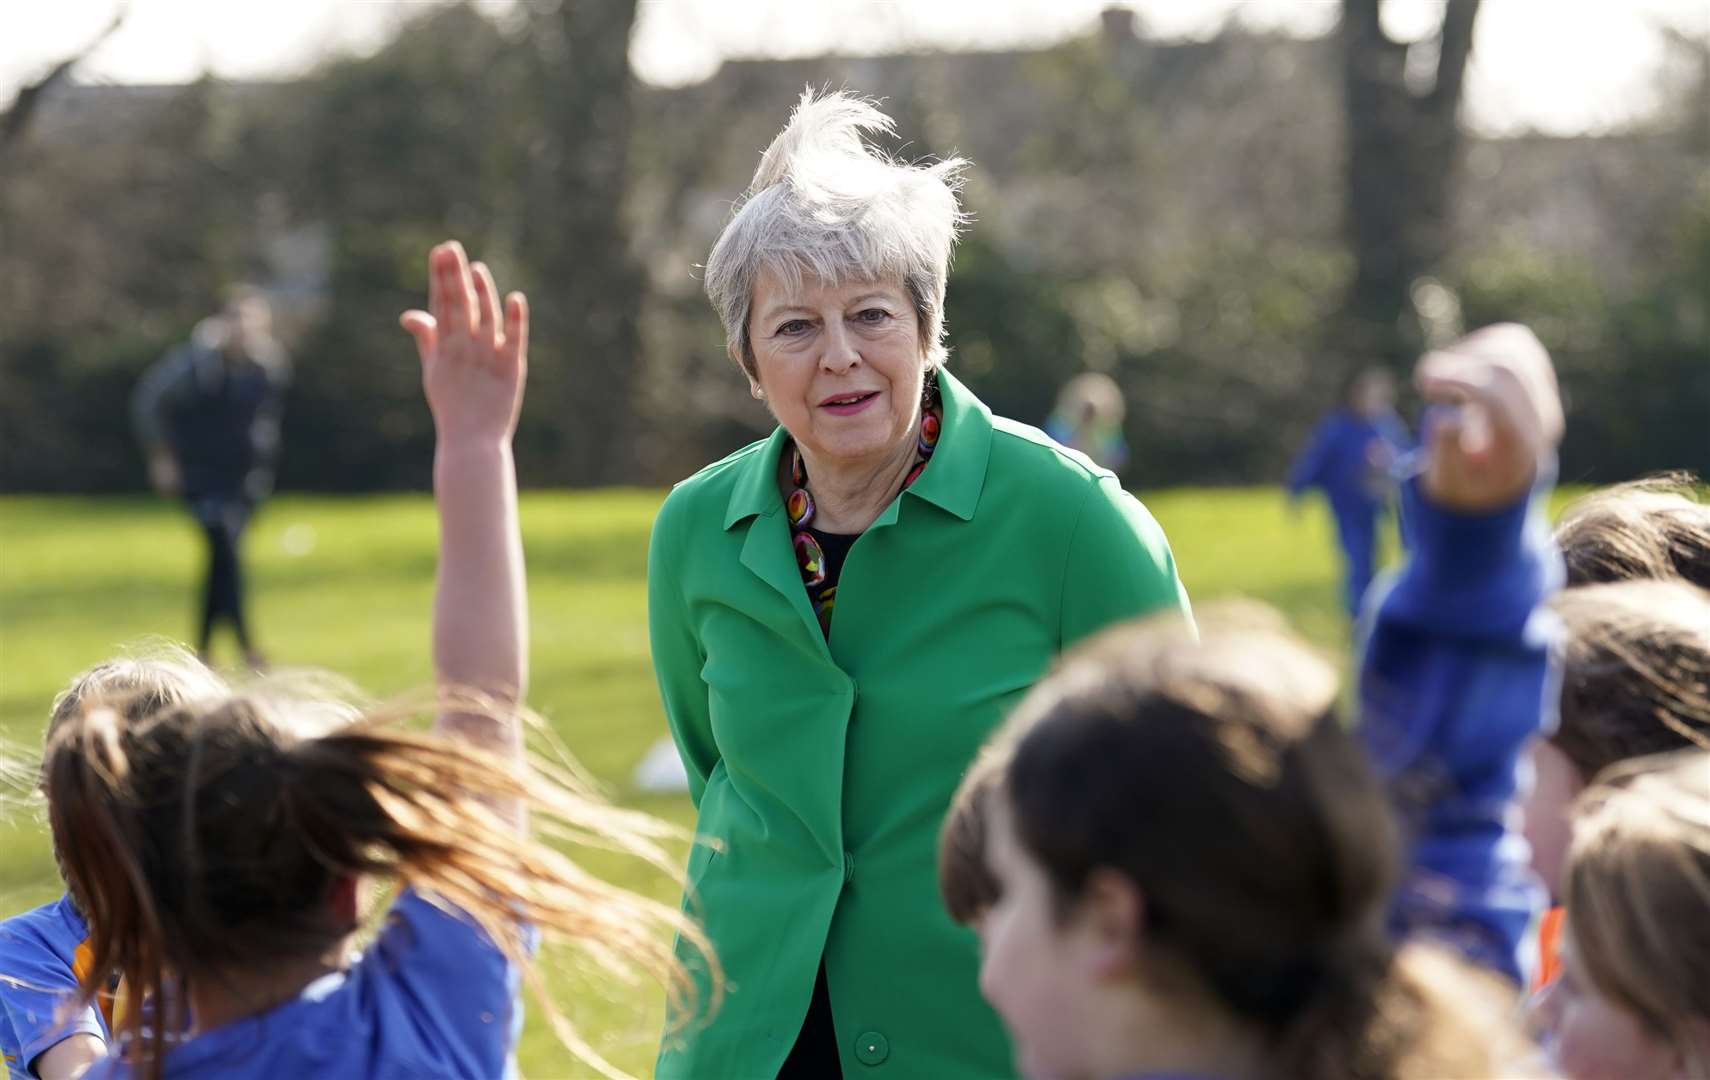 Theresa May talks to schoolgirls at a football session during a visit to St Mary’s Catholic Primary School in Maidenhead, Berkshire (Andrew Matthews/PA)